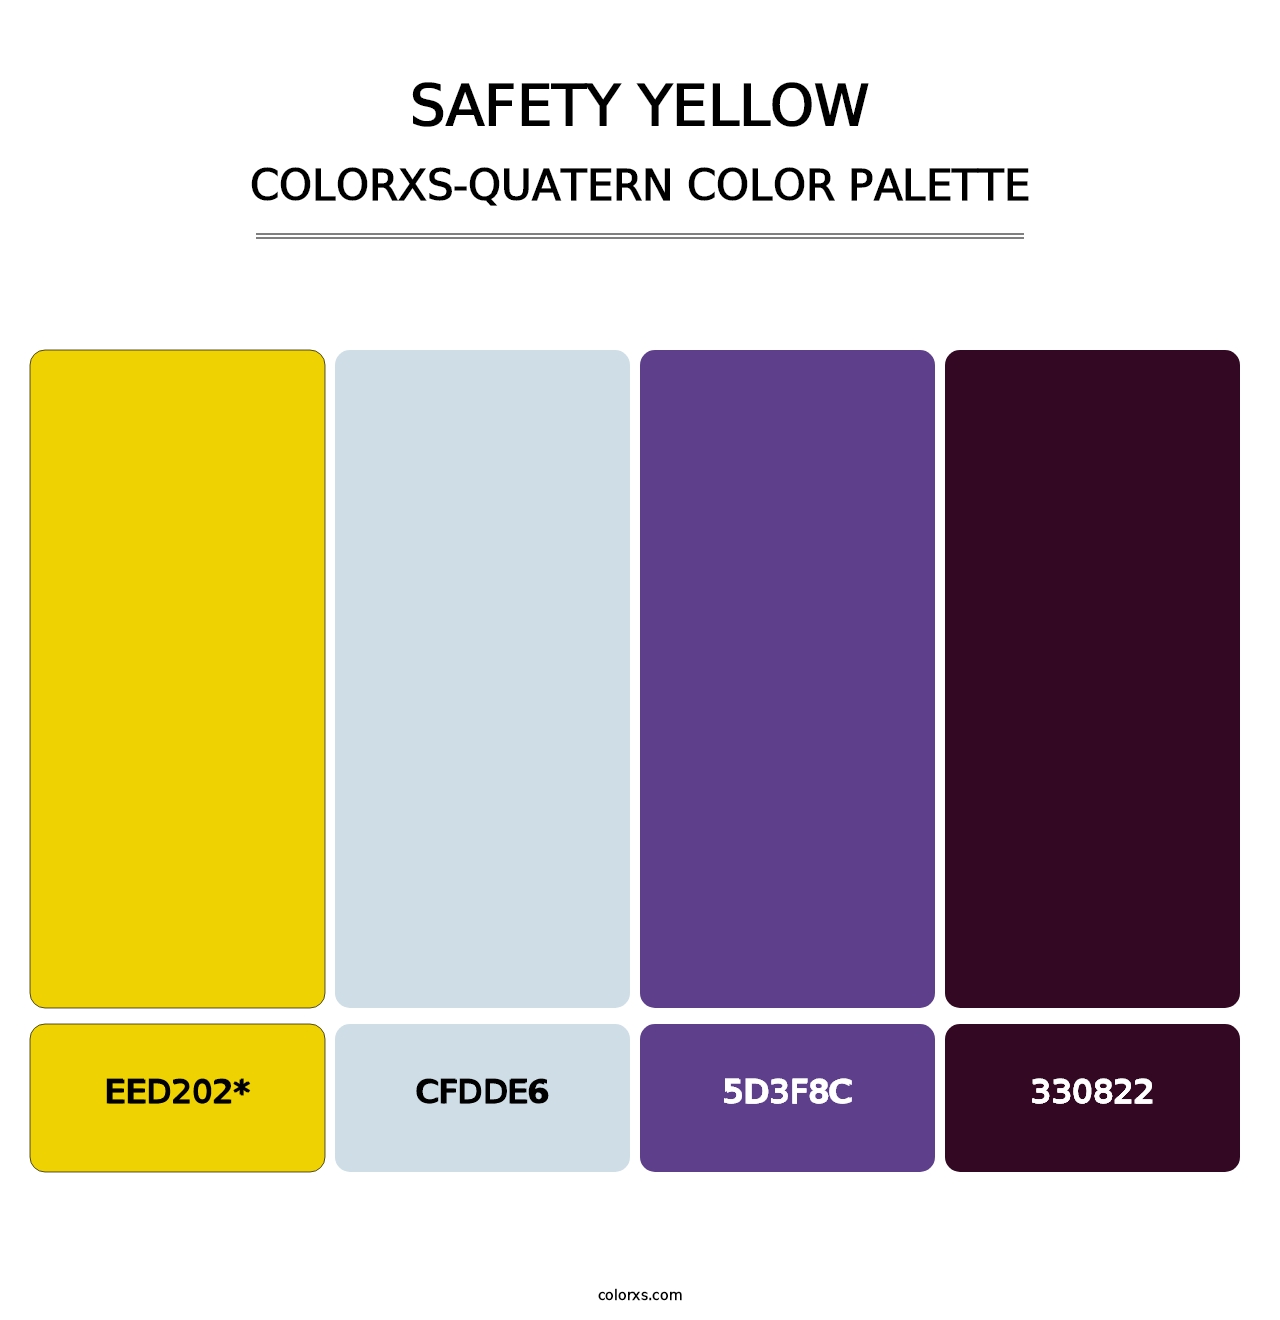 Safety Yellow - Colorxs Quatern Palette